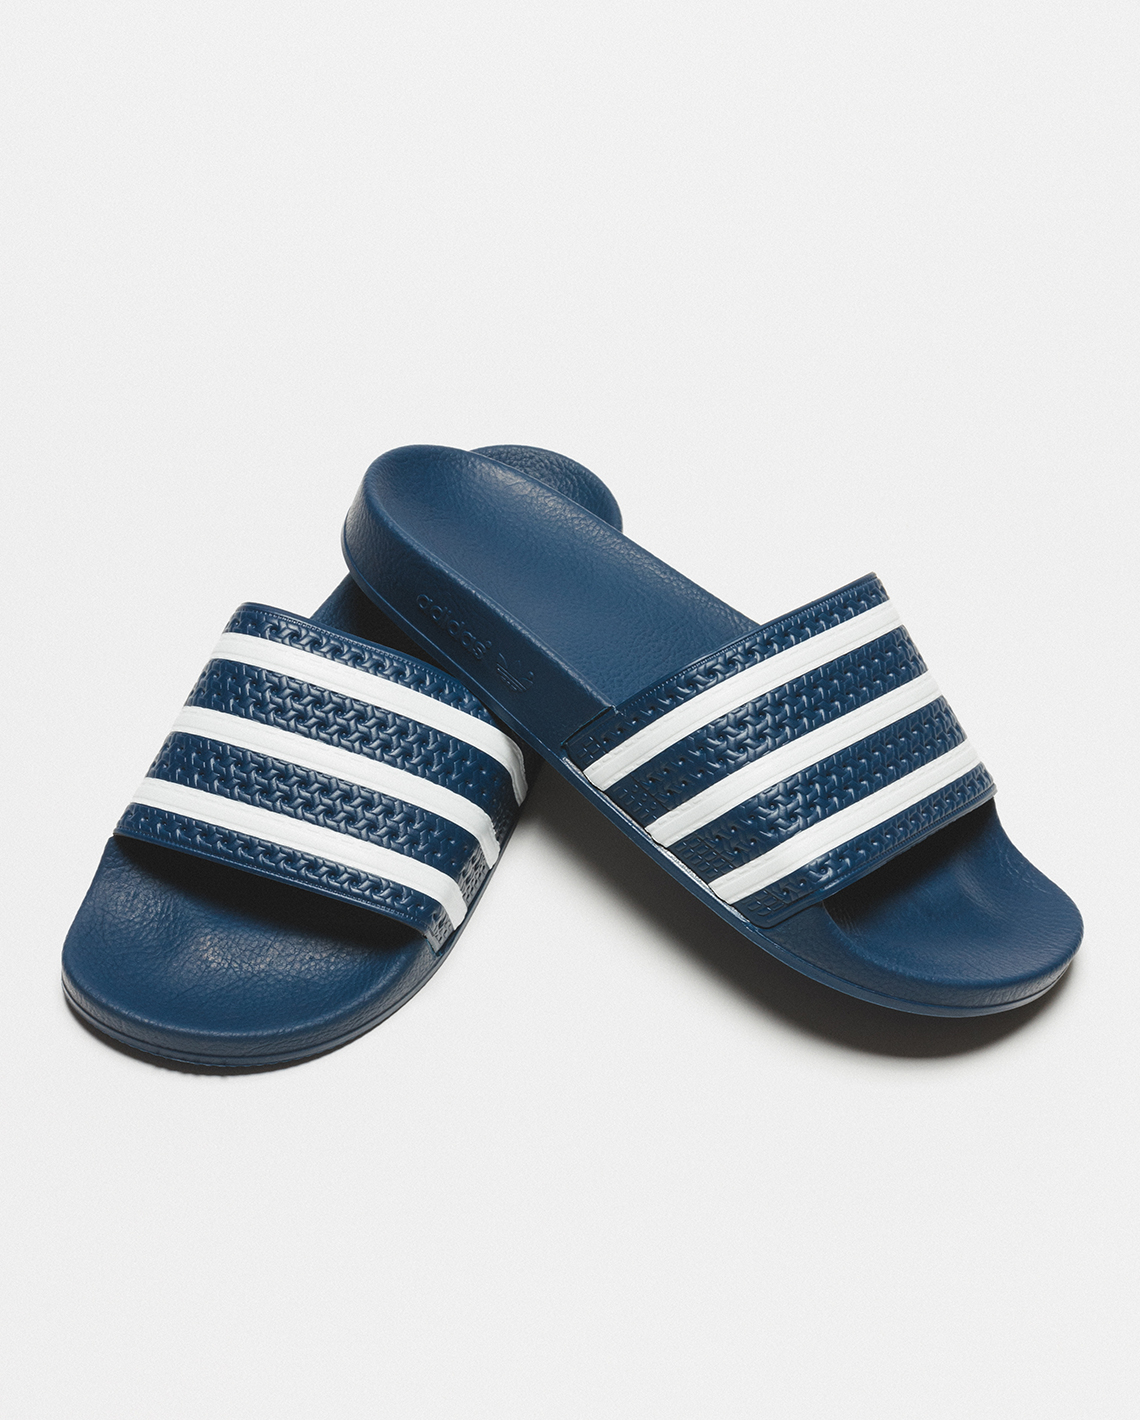 From Spring To Summer, These adidas Essentials Are Made For Every ...